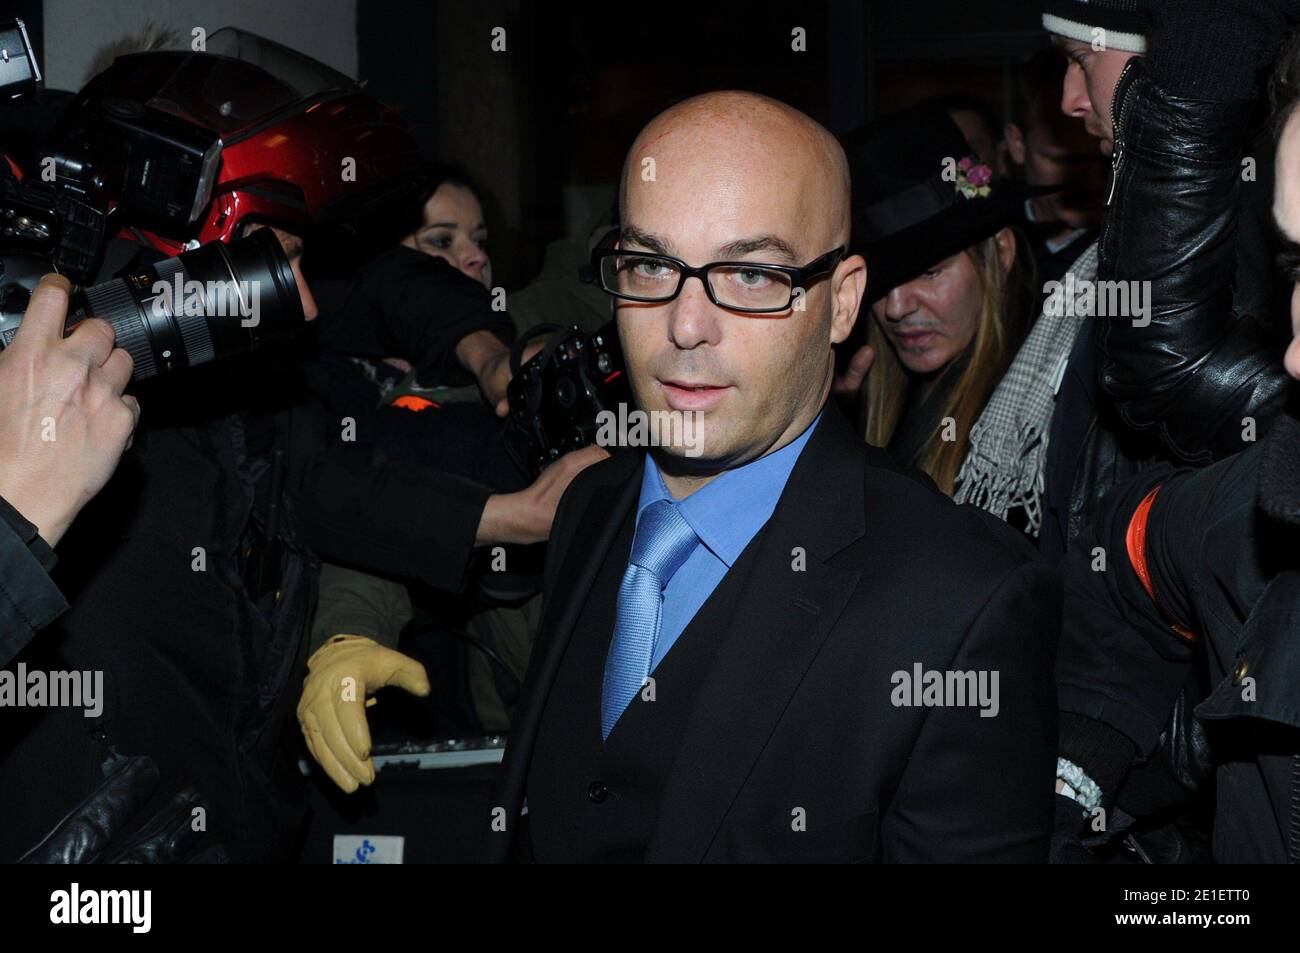 British designer John Galliano and his lawyer Stephane Zerbib are seen leaving the 3rd arrondissement precinct where John Galliano should be confronted with a couple accusing him of anti-Semitic comments in Paris, France on February, 28, 2011. John Galliano, the chief designer at Christian Dior since 1996, has been suspended from his duties at the fashion house after he was arrested for allegedly assaulting a woman and making anti-Semitic remarks at an outdoor Paris cafe 'La Perle'. Photo by ABACAPRESS.COM Stock Photo